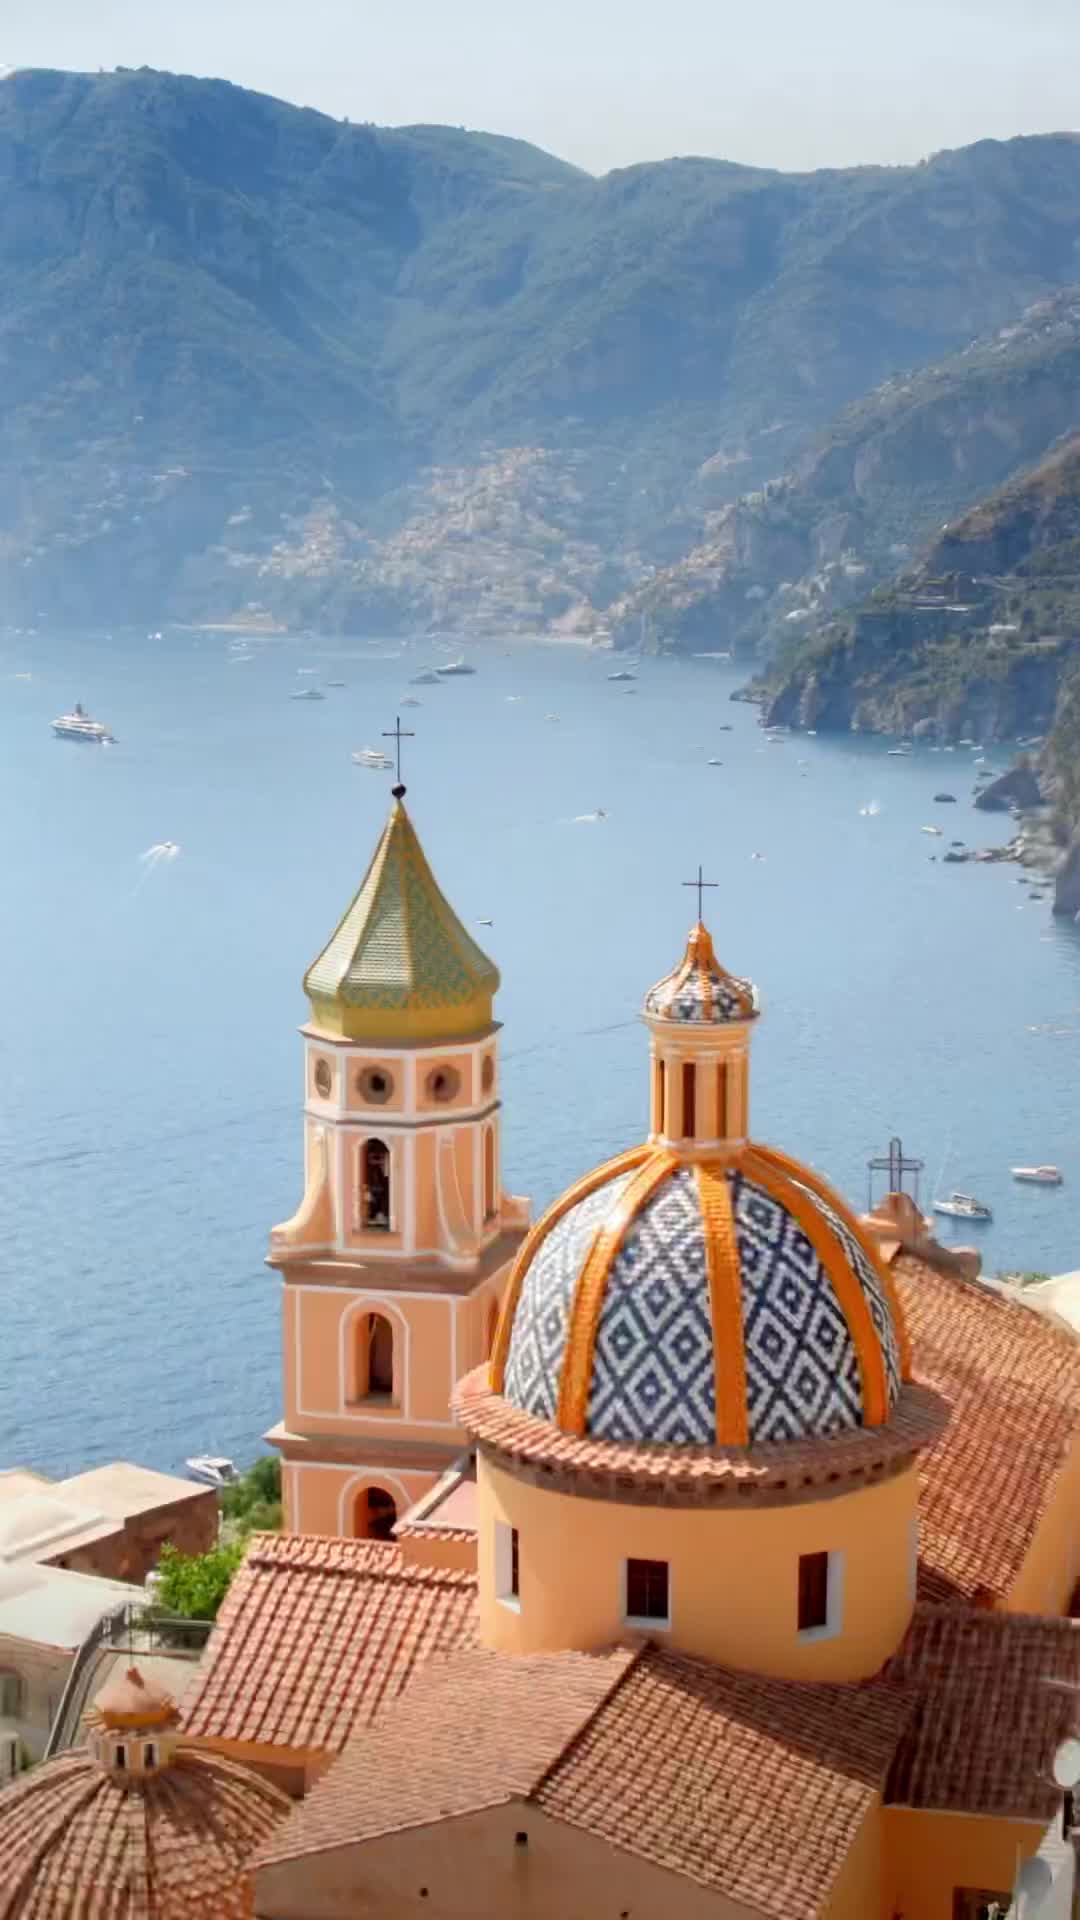 Dive into the Blue Waters of Amalfi Coast with Positano View